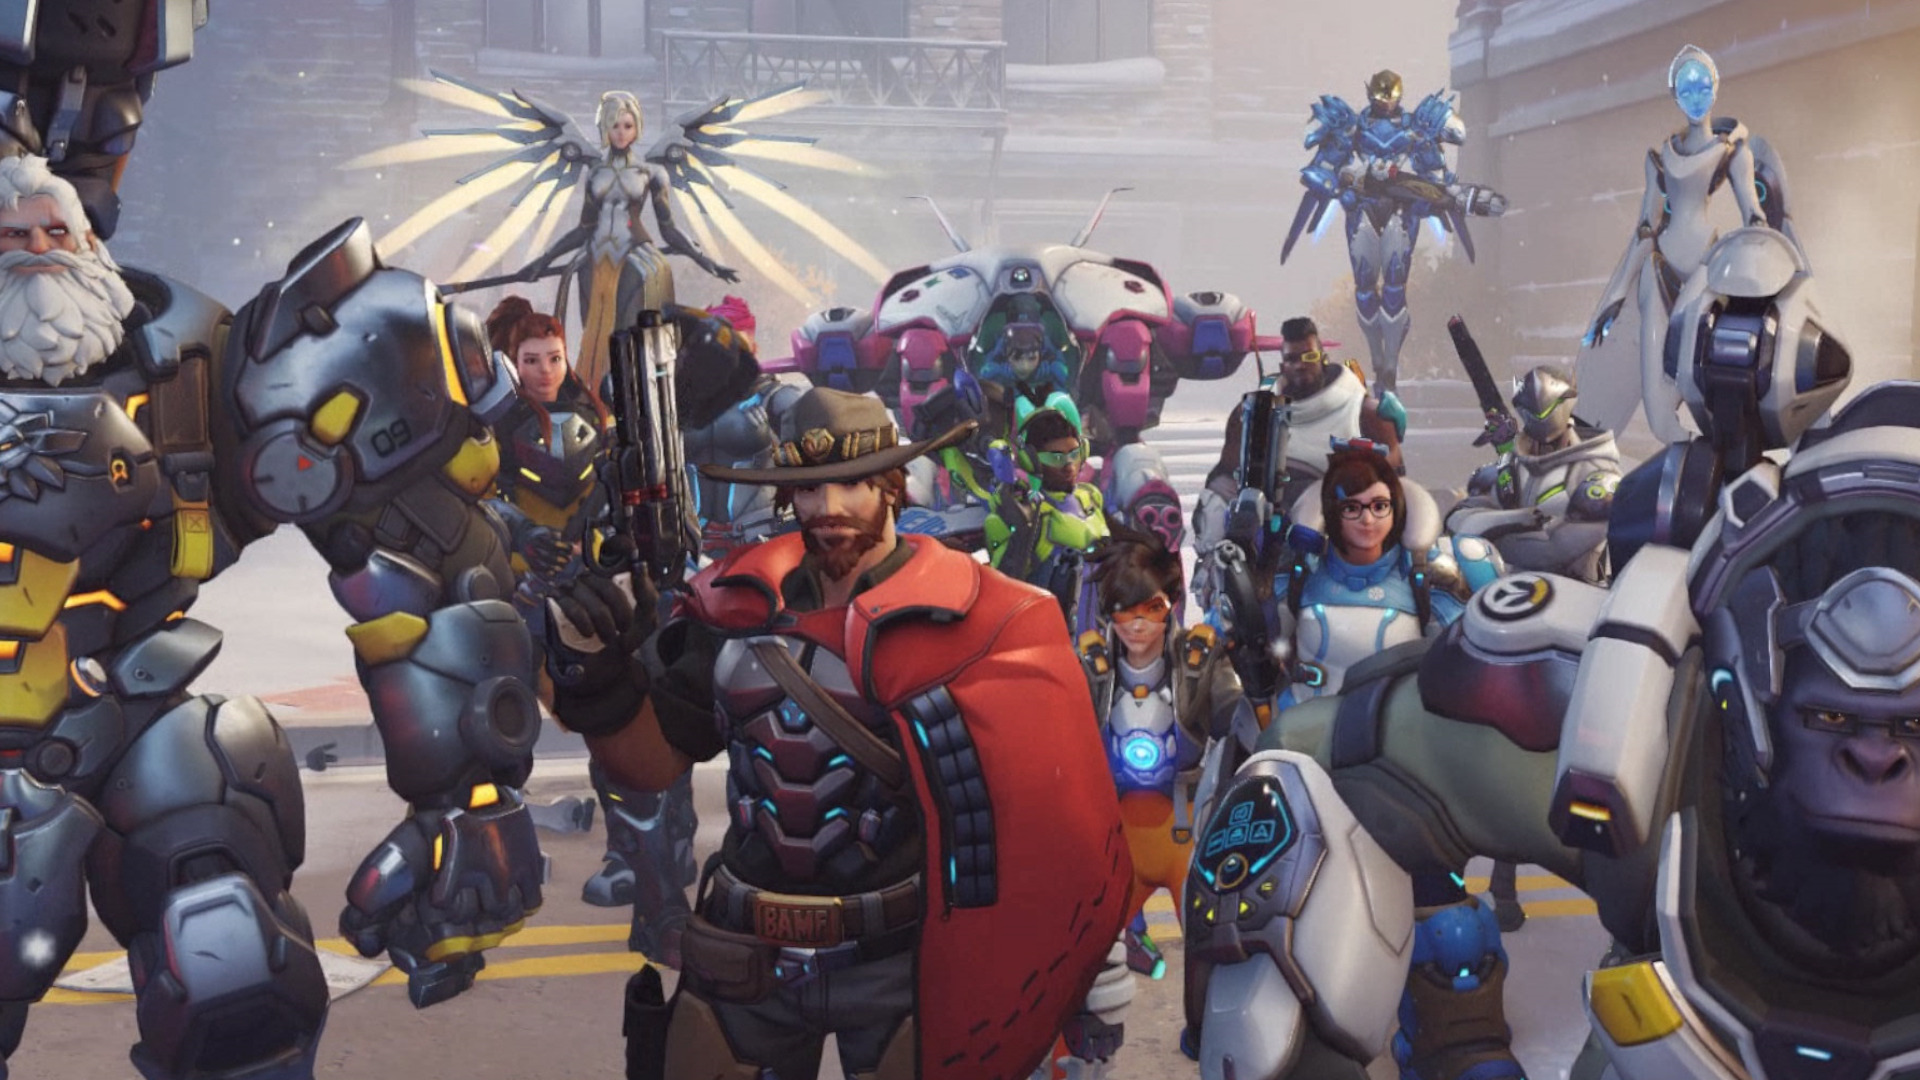 Overwatch 2's First Steam User Numbers Are In, And They're Pretty Solid  Despite Review Bombing